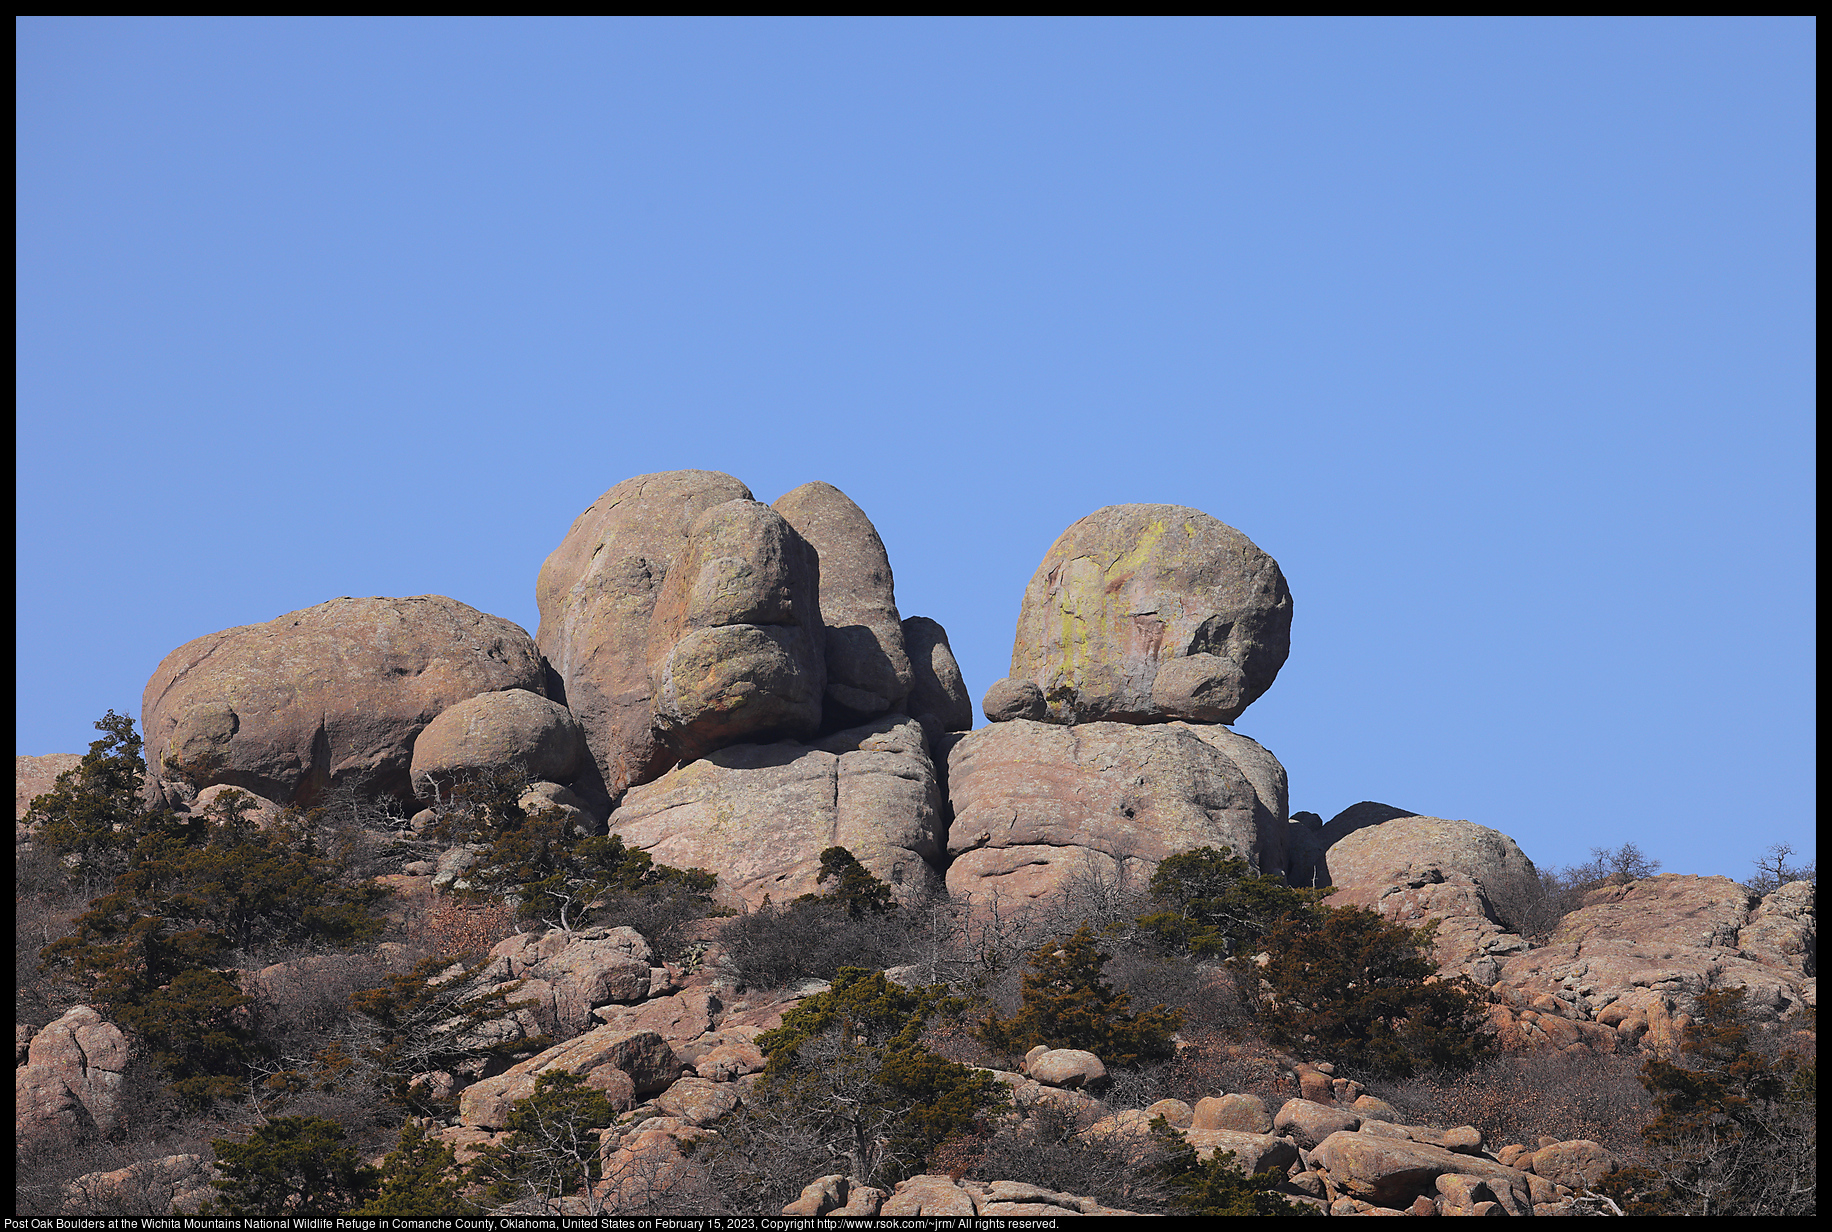 Post Oak Boulders at the Wichita Mountains National Wildlife Refuge in Comanche County, Oklahoma, United States on February 15, 2023